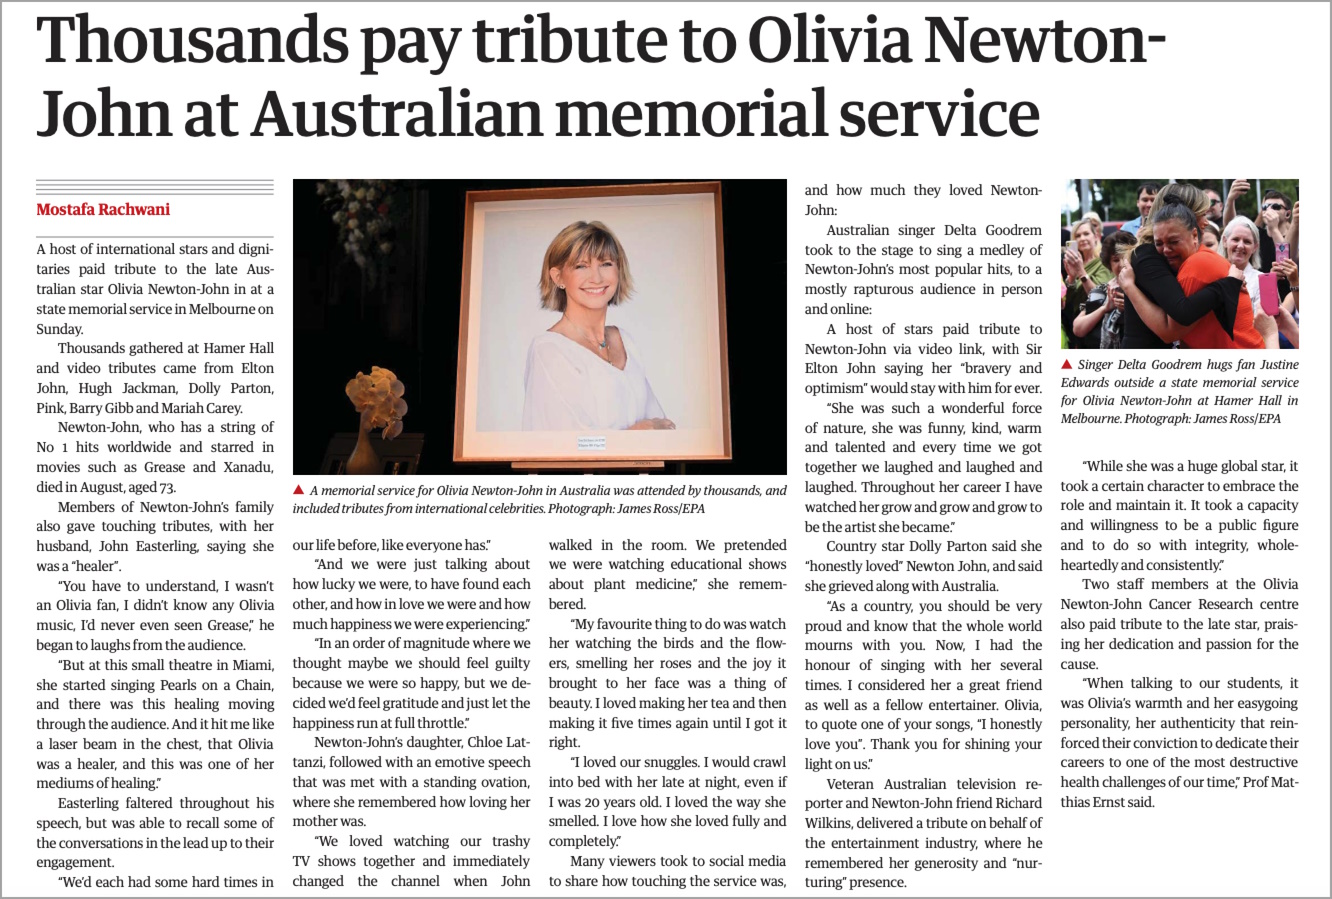 Thousands Pay Tribute To Olivia - Guardian